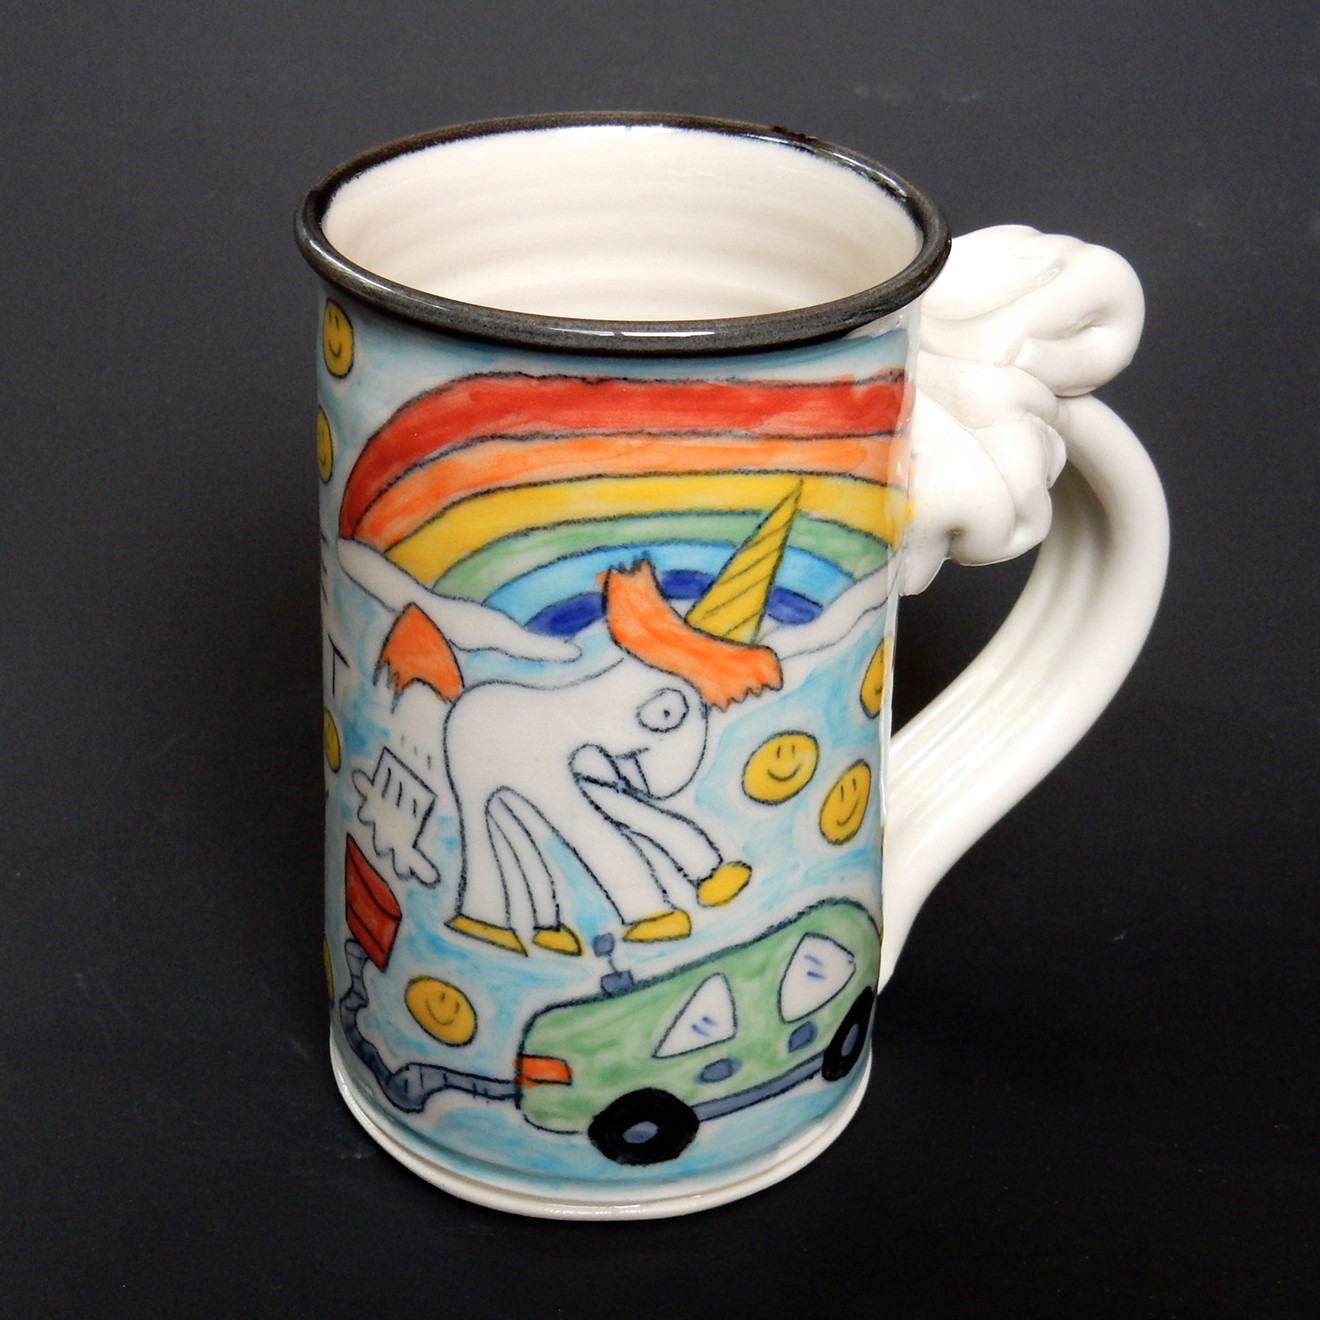 Tom Edwards's mug with the farting unicorn image that wound up in Elon Musk's cars.